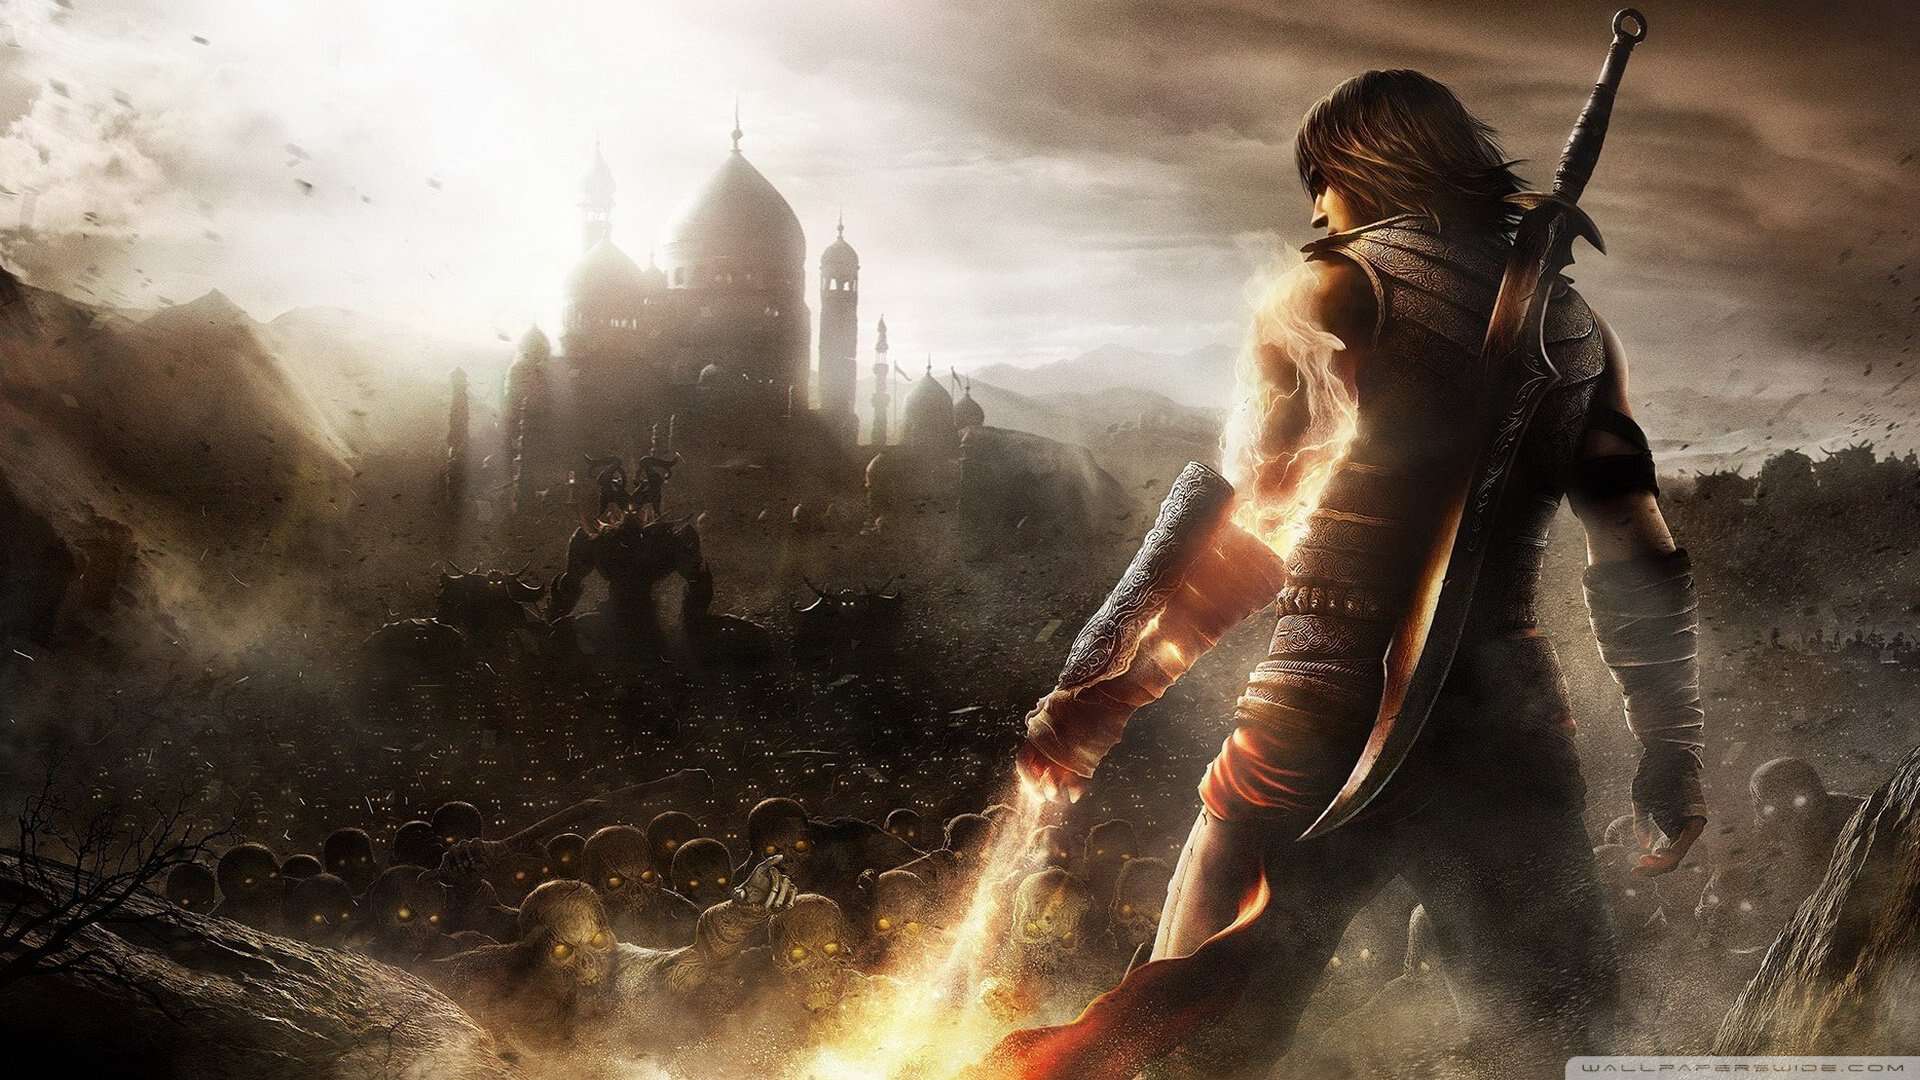 Prince of Persia 5: The Forgotten Sands iOS/APK Version Full Game Free Download